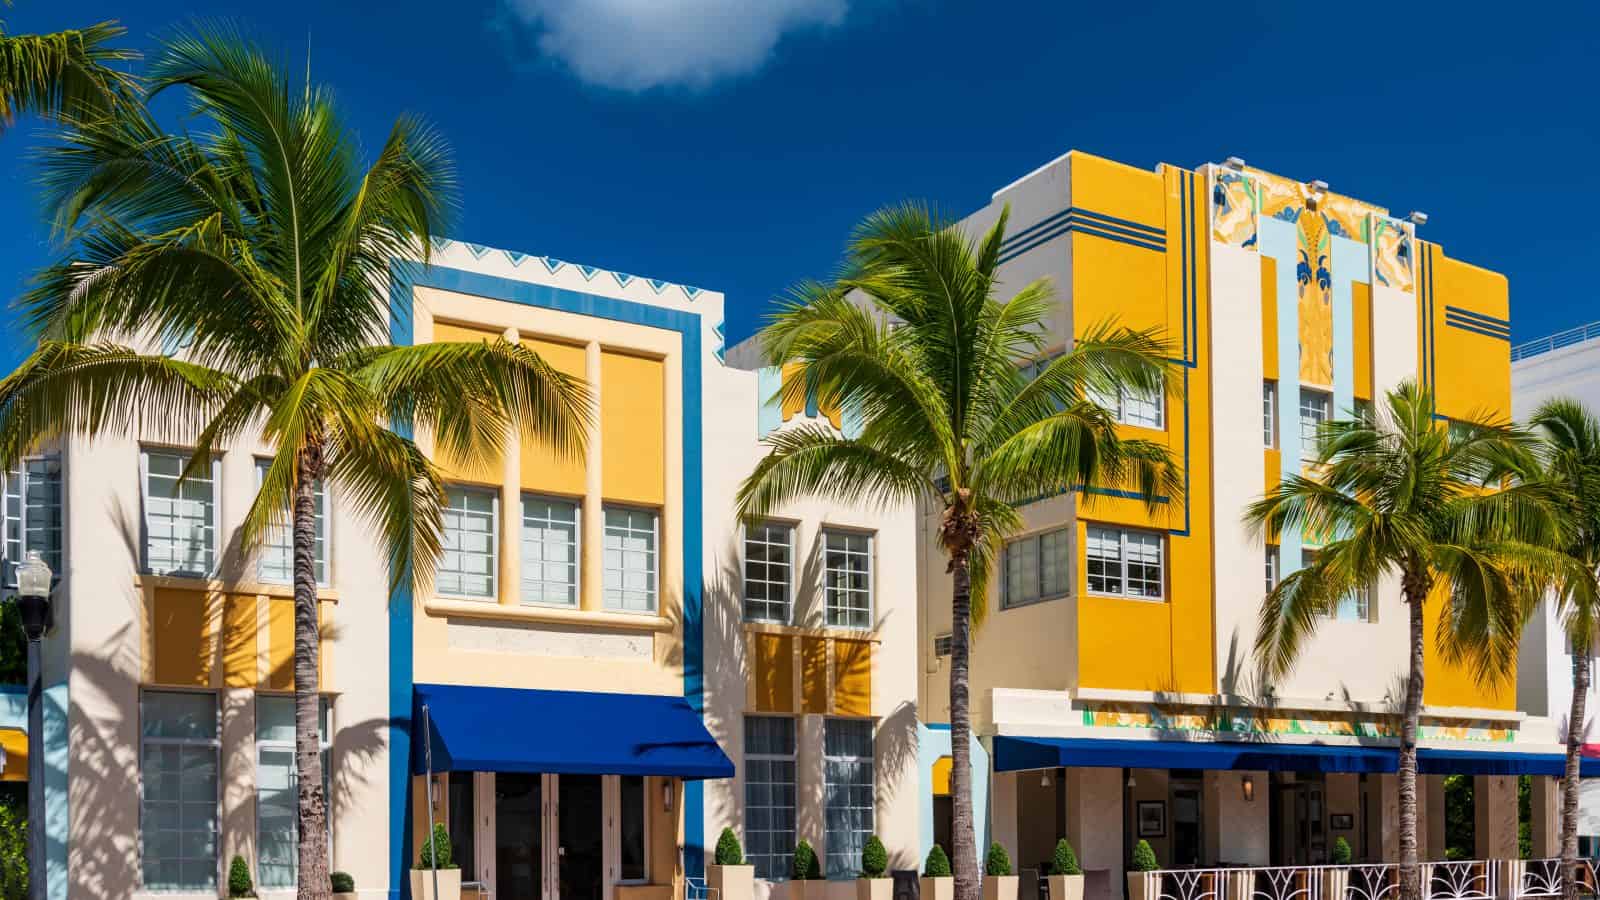 art deco buildings one of the best places to visit in miami